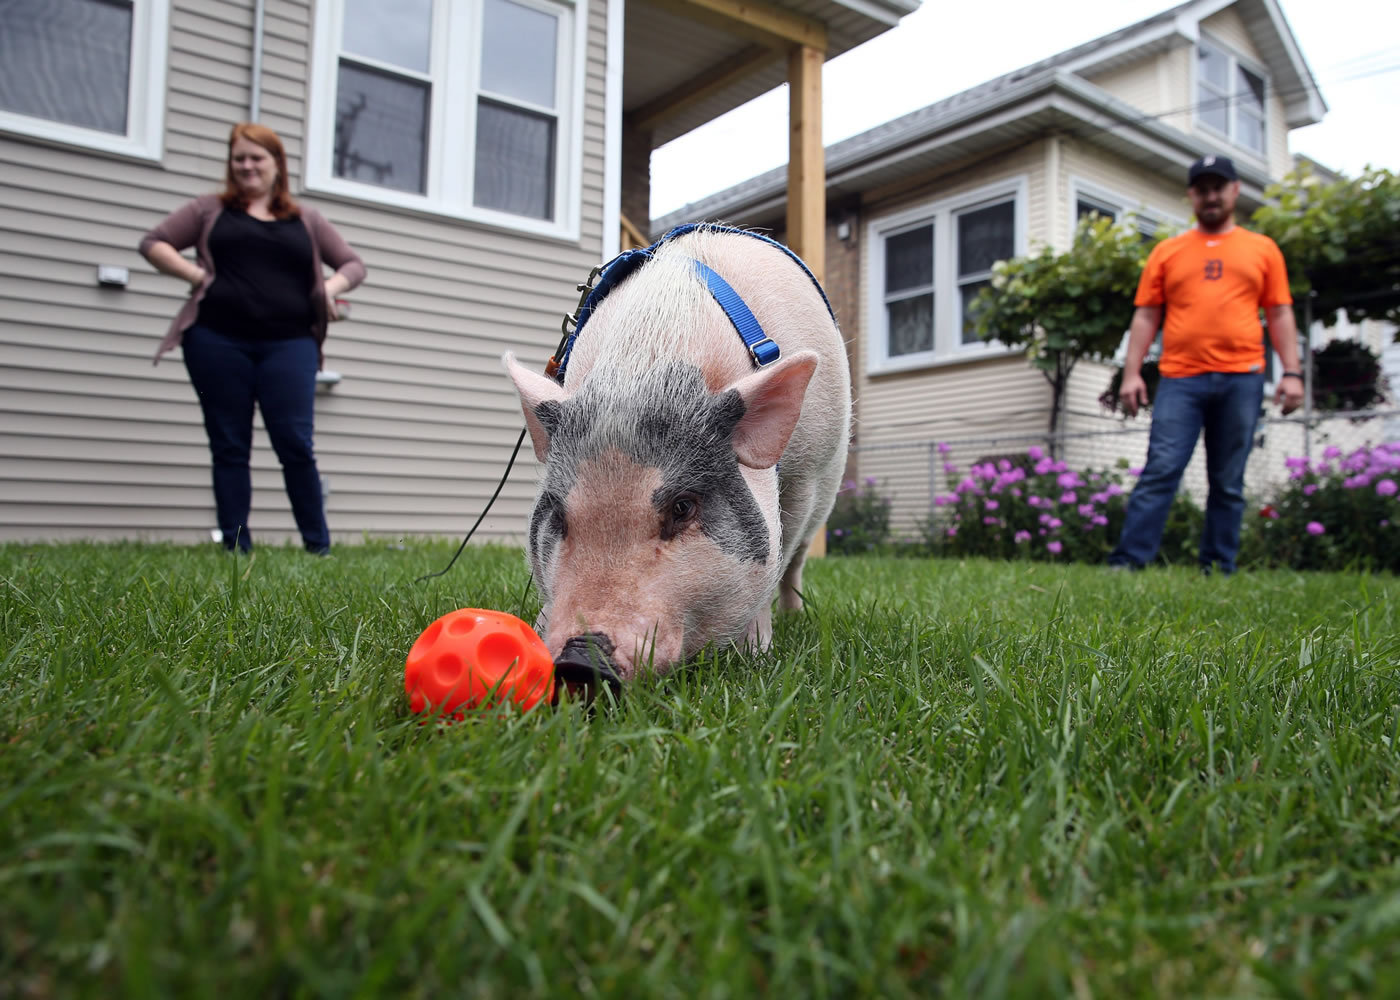 Jennifer Folino, her husband Matt Folino and their pet pig Linus settle into their new home July 25 on the northwest side of Chicago.